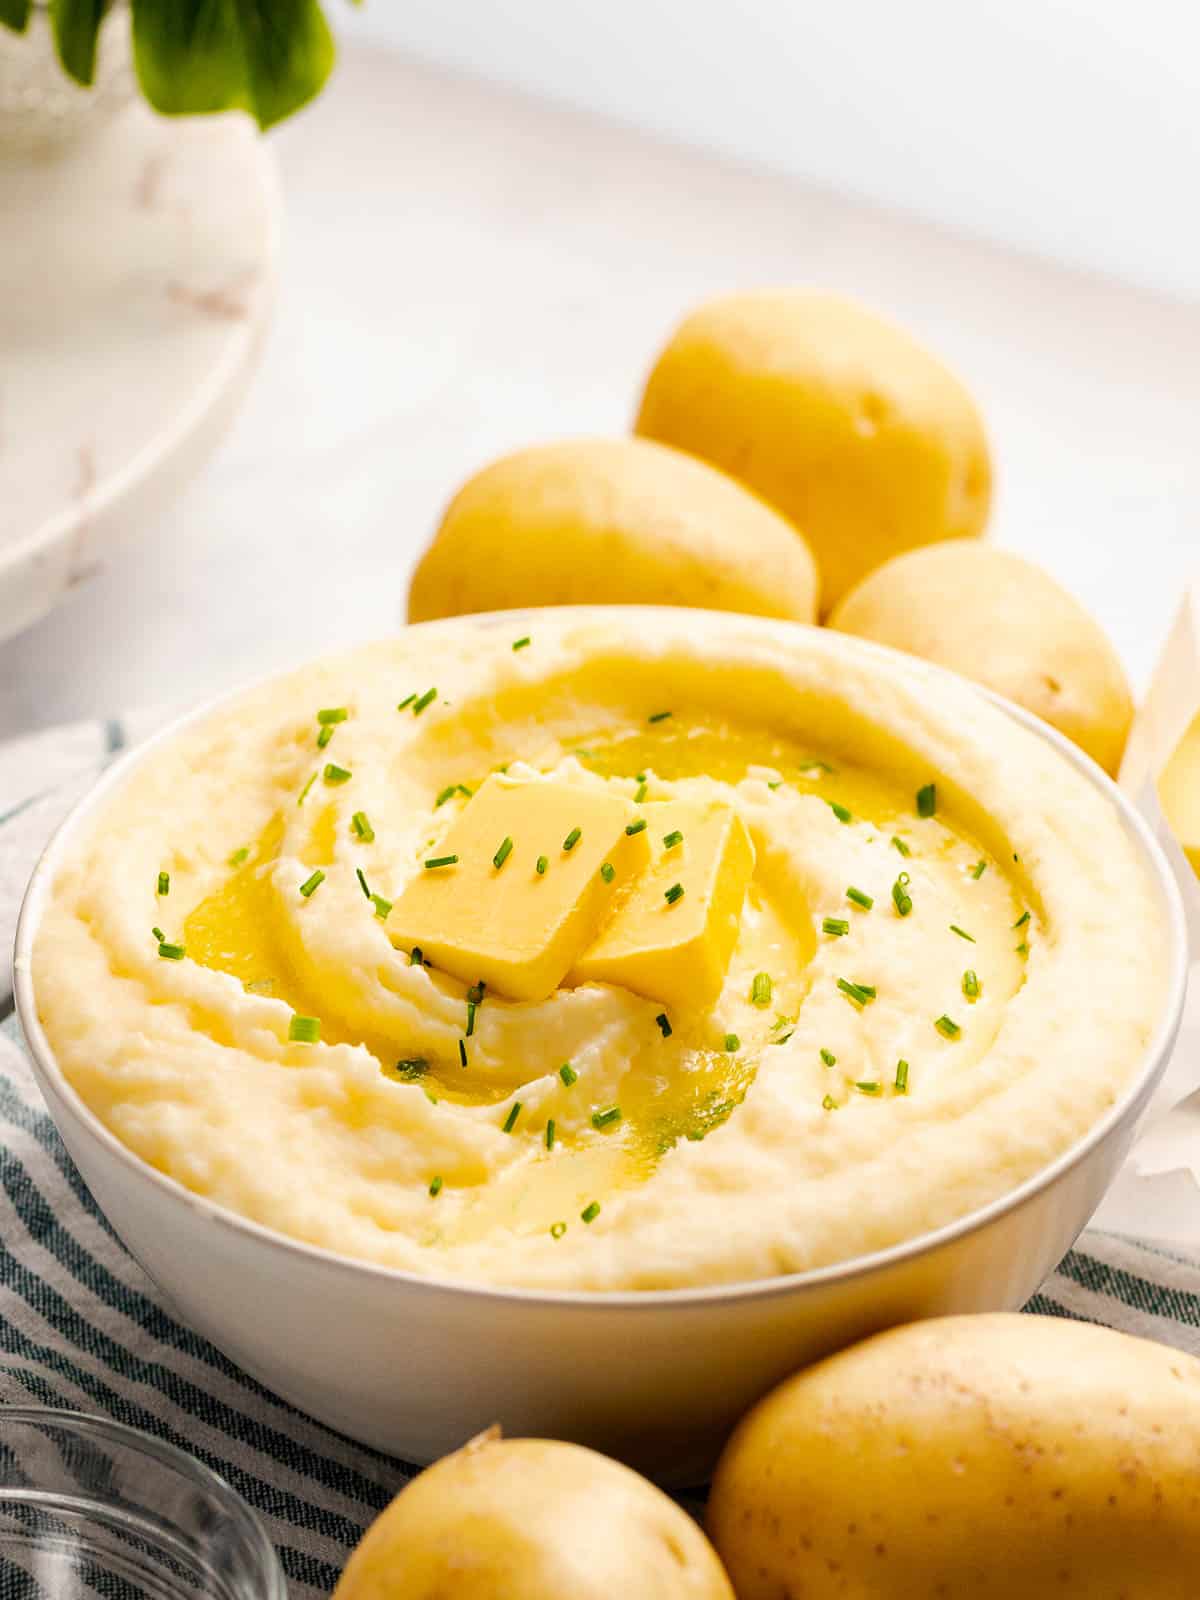 Creamy sour cream mashed potatoes made with Yukon gold potatoes.